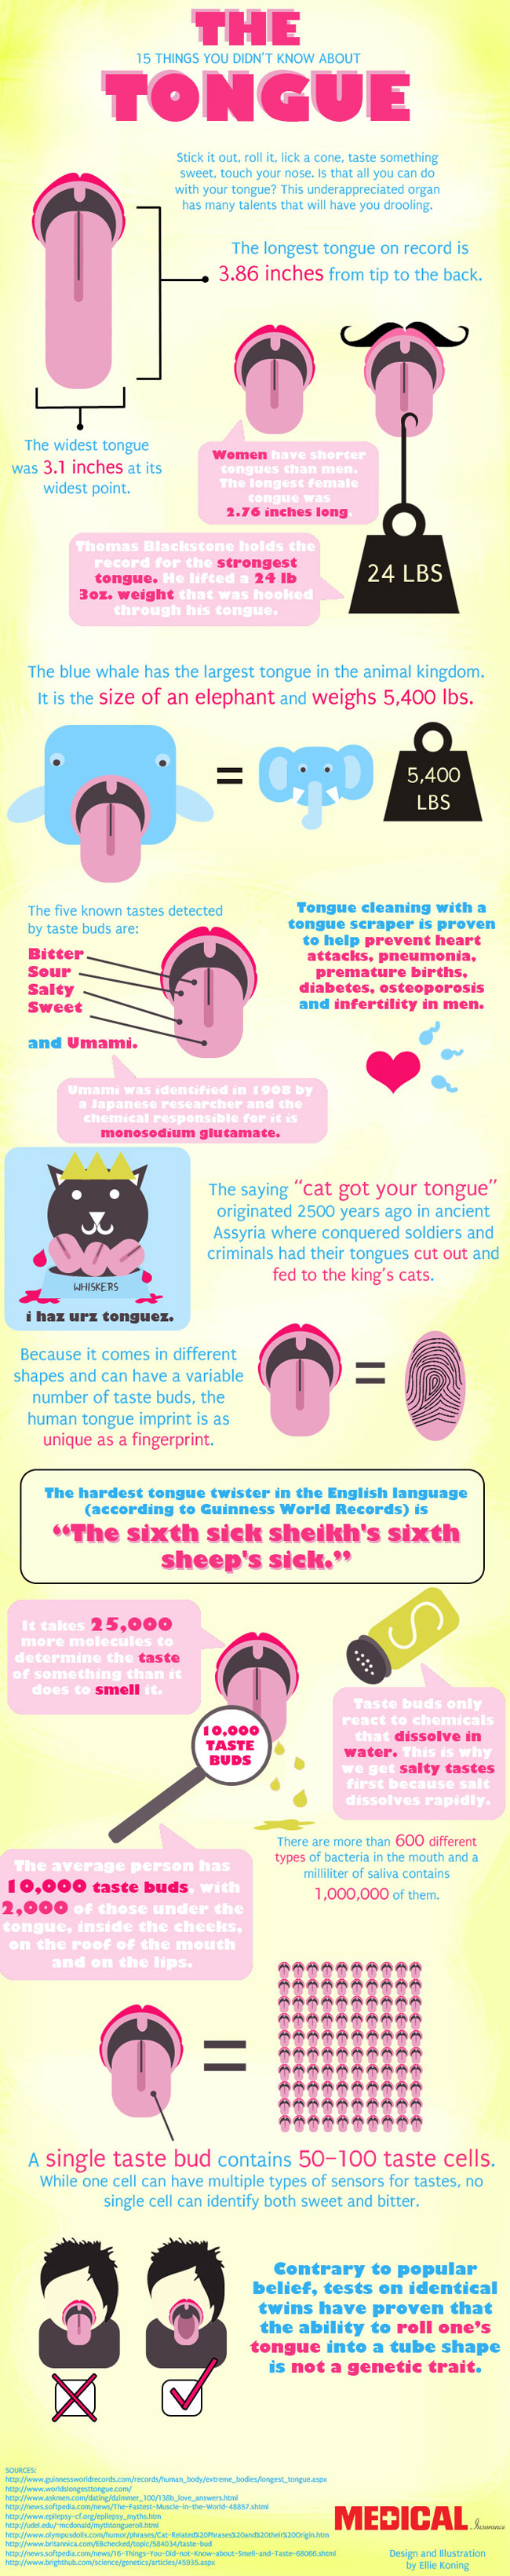 15 Interesting Facts about Tongue 